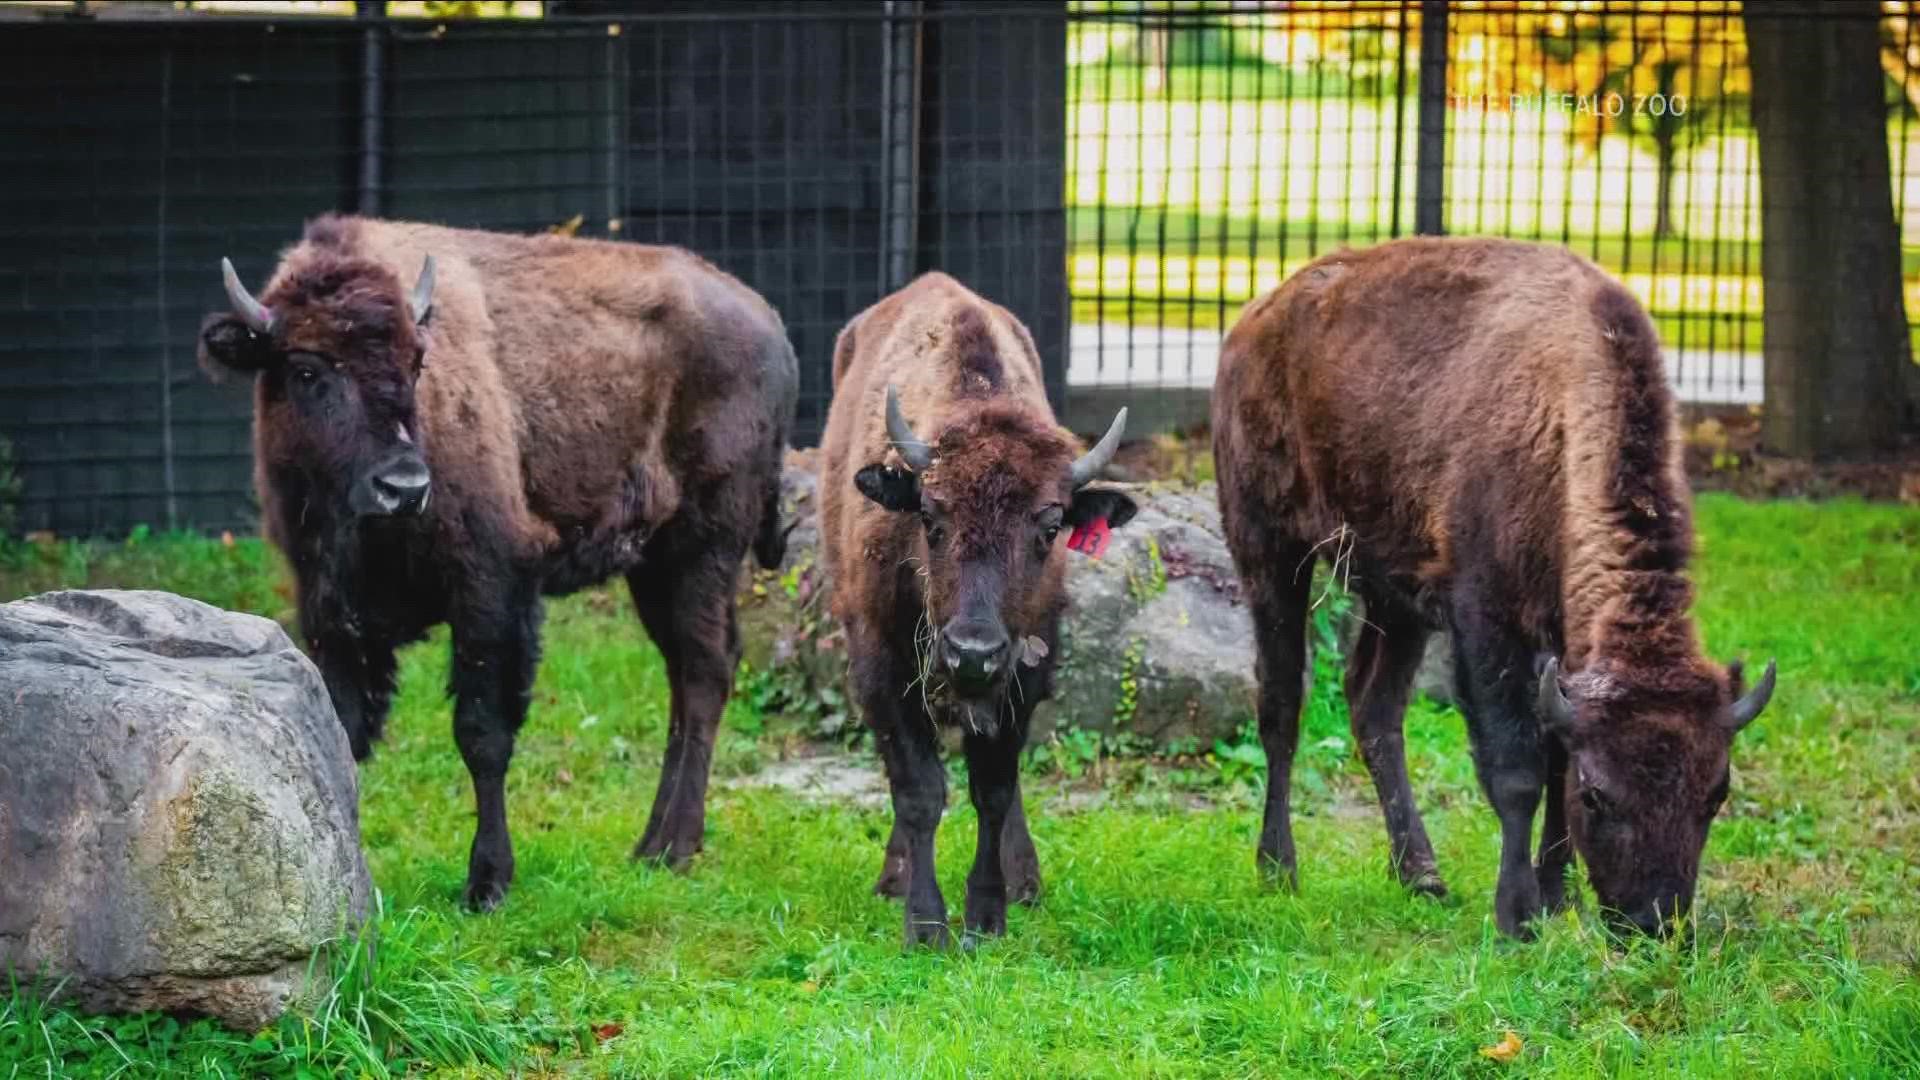 Buffalo Zoo welcomes three new American Plains Bison